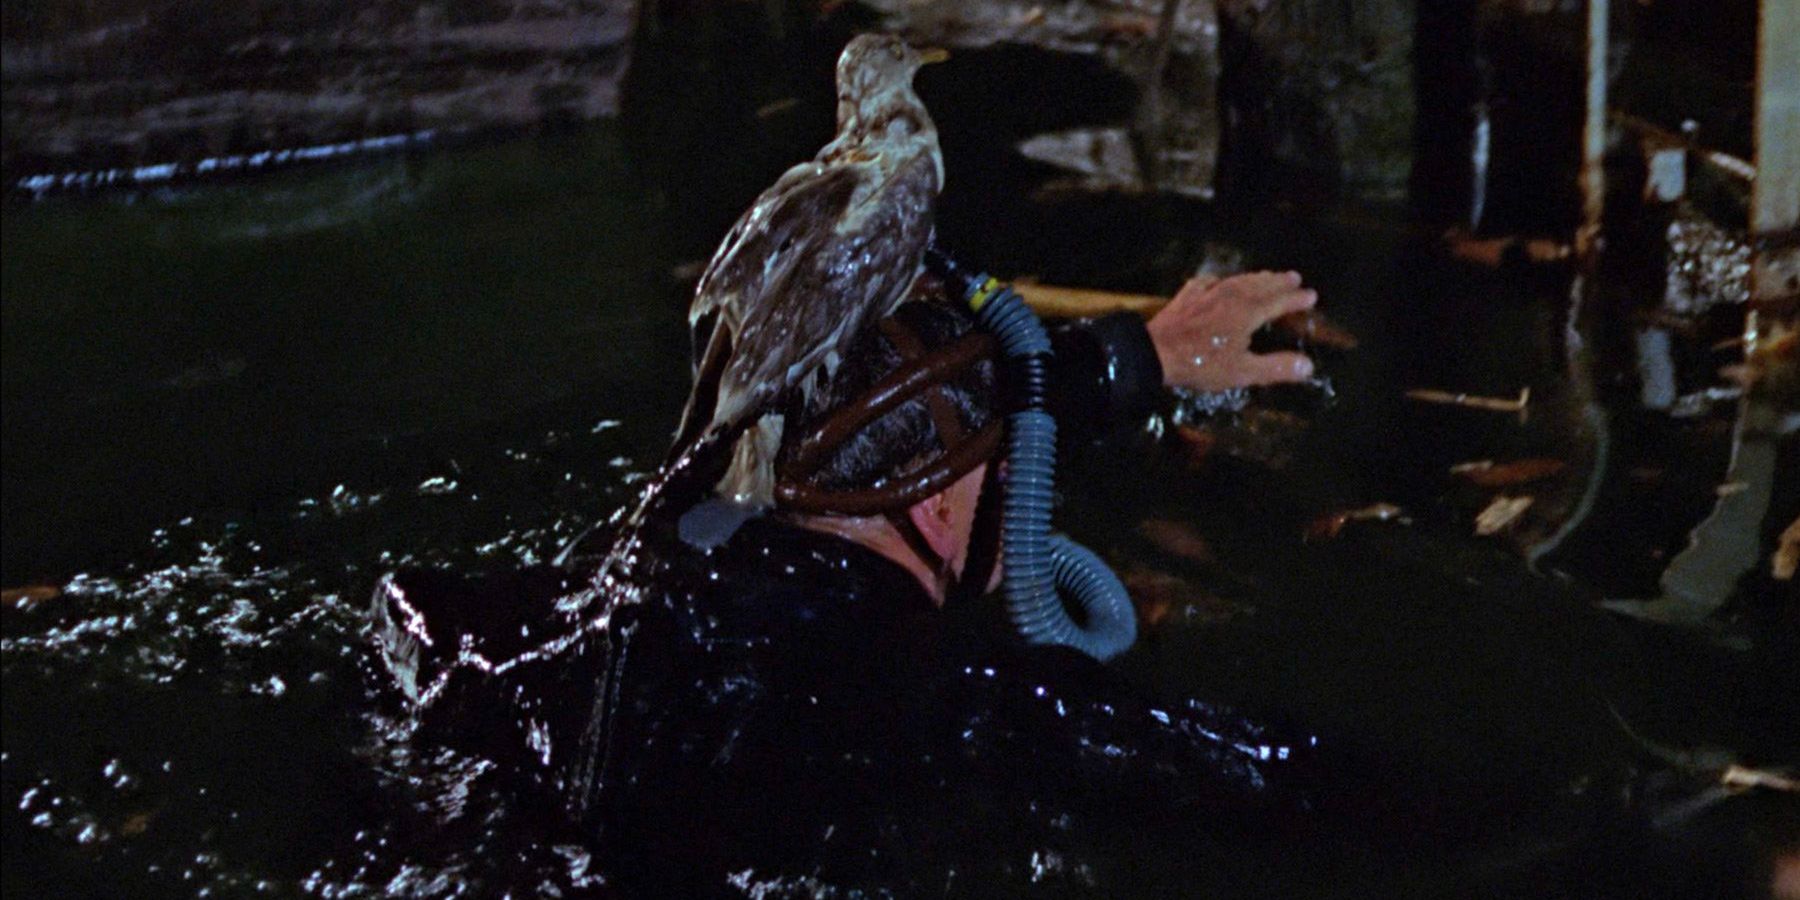 James Bond emerges from the water wearing scuba gear adorned with a seagull prop. 